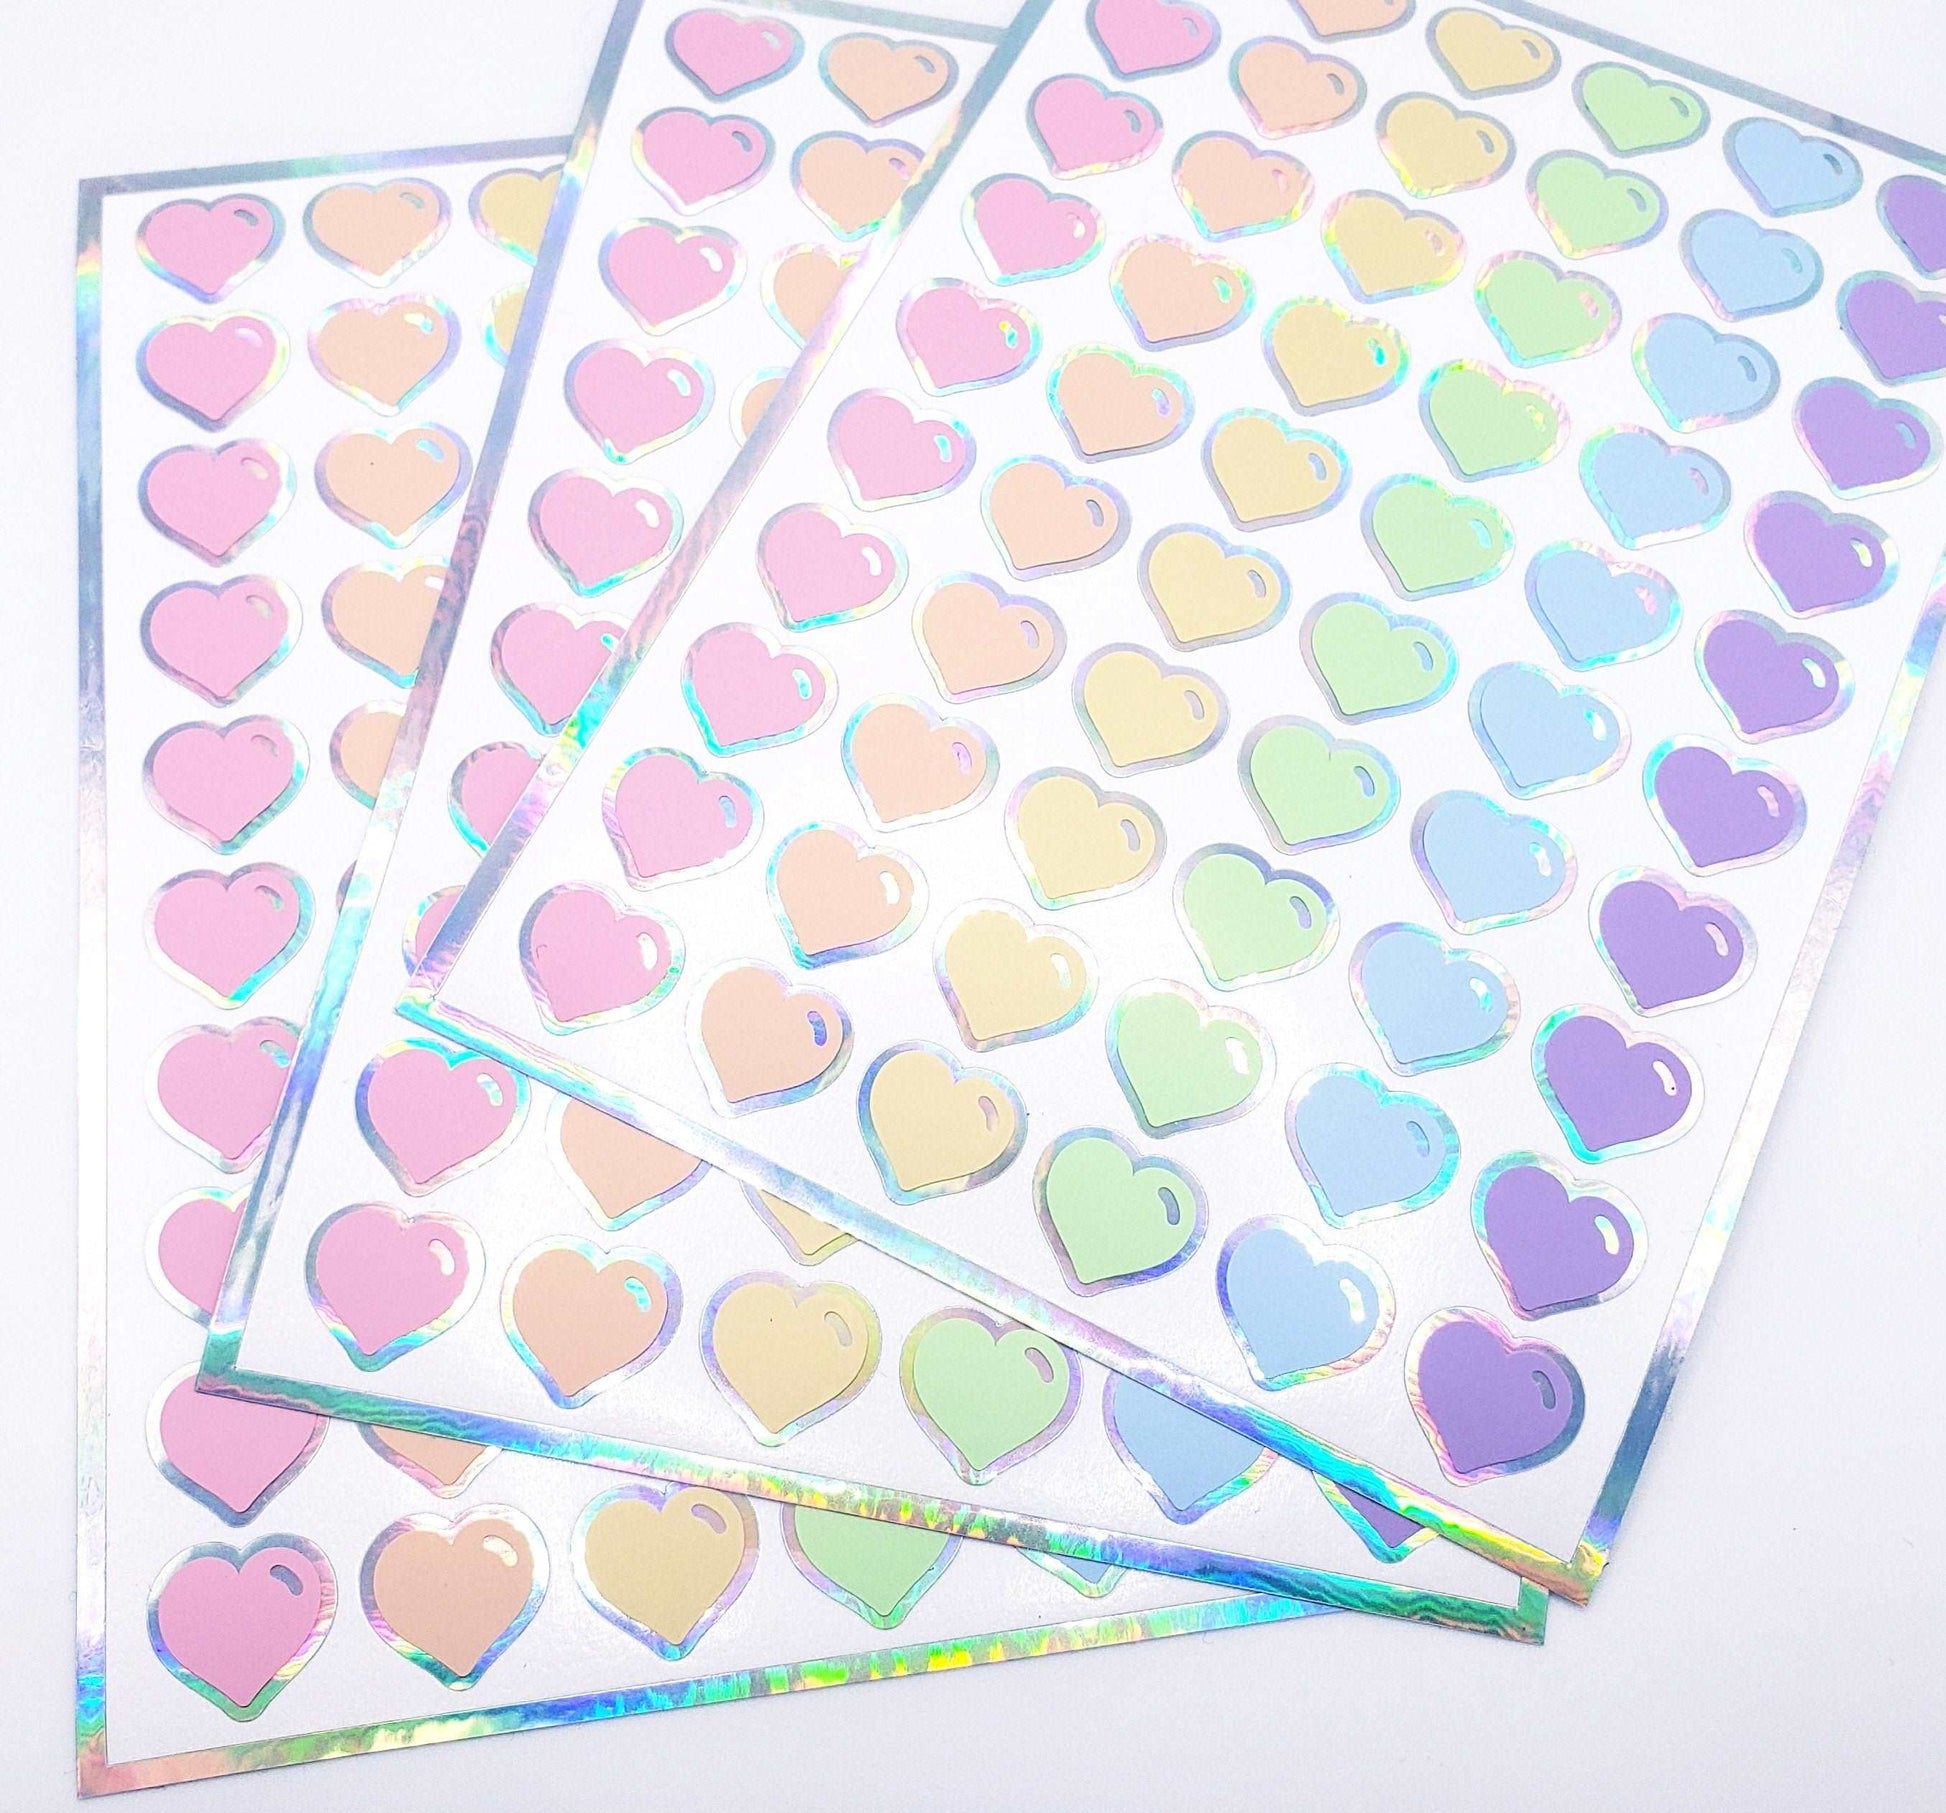 Pastel Rainbow Colors Heart Stickers, set of 60 small vinyl hearts for invitations, envelopes and journals, Scrapbook page embellishments.